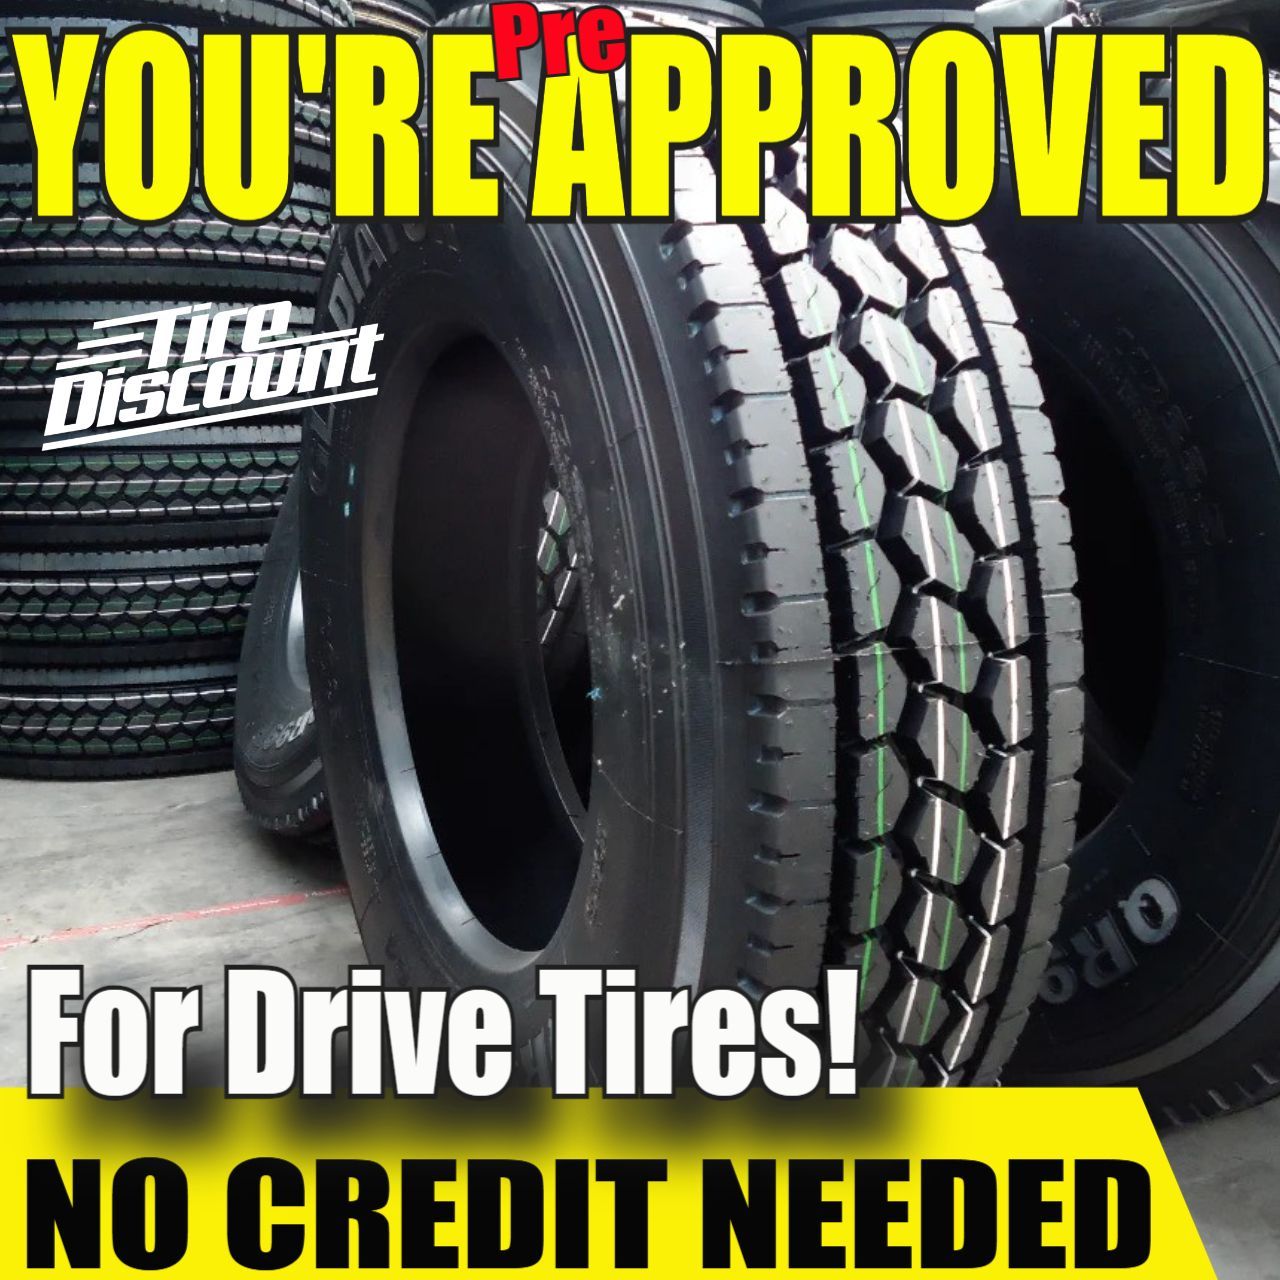 you 're approved for drive tires no credit needed